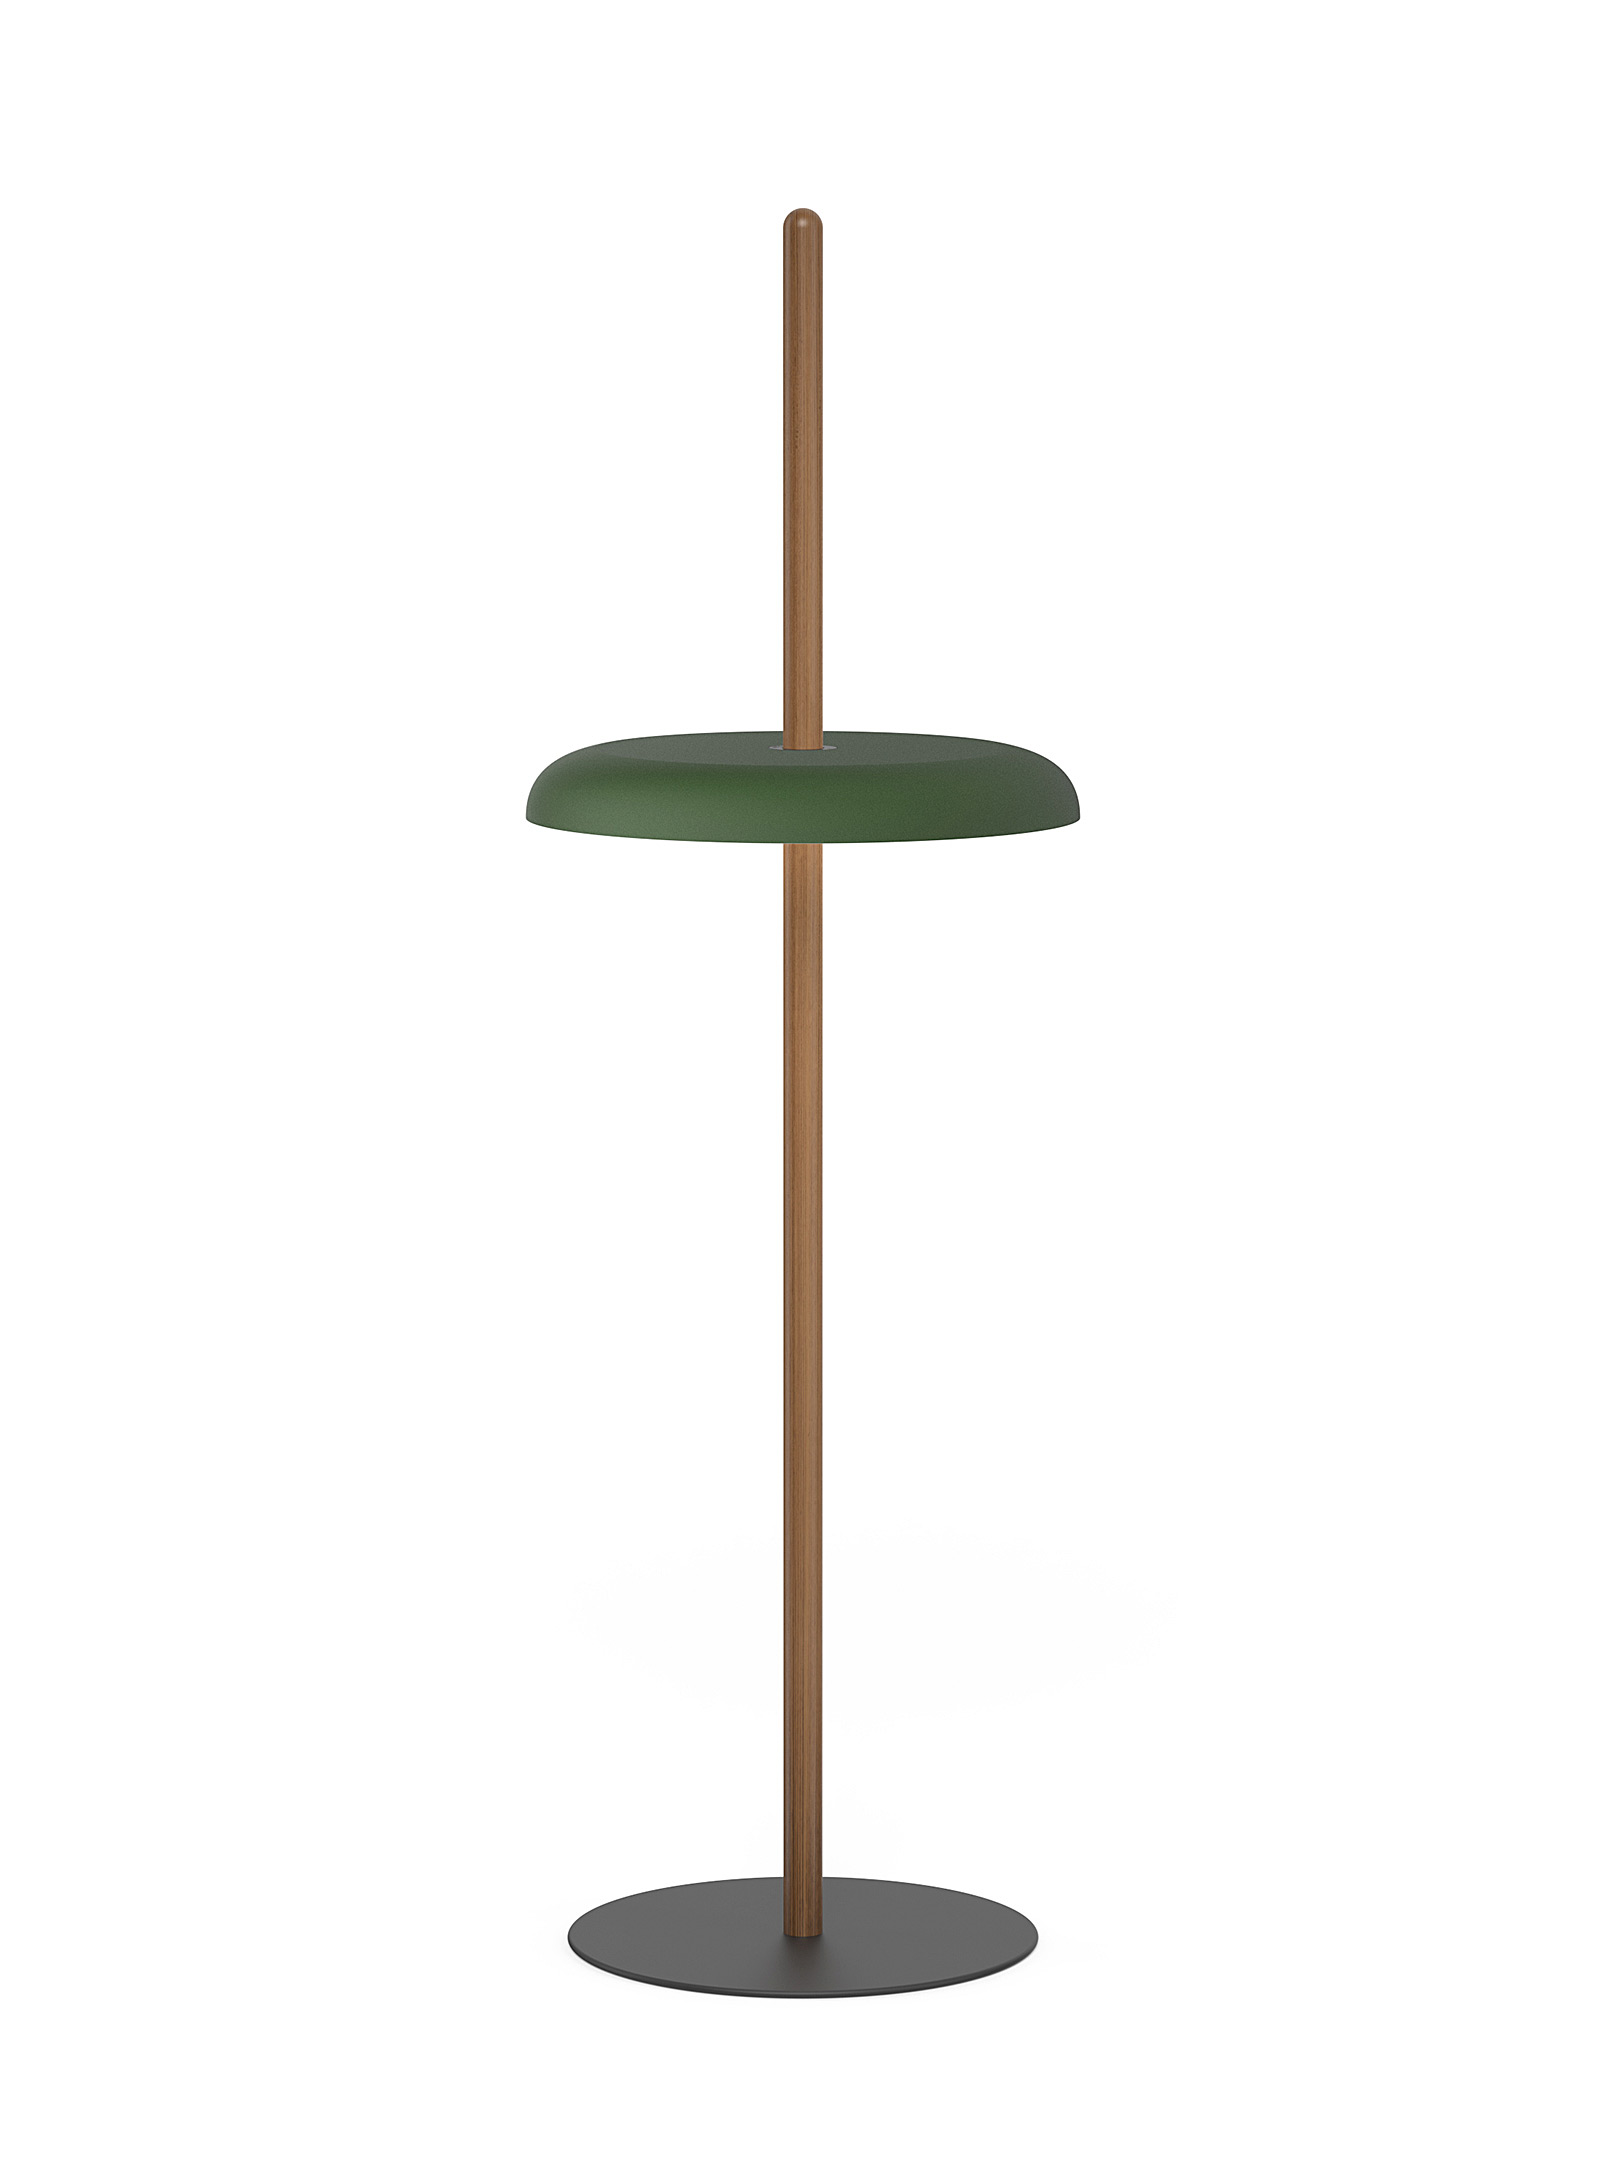 Pablo Designs Nivél Floor Lamp With Solid Walnut Pole In Green